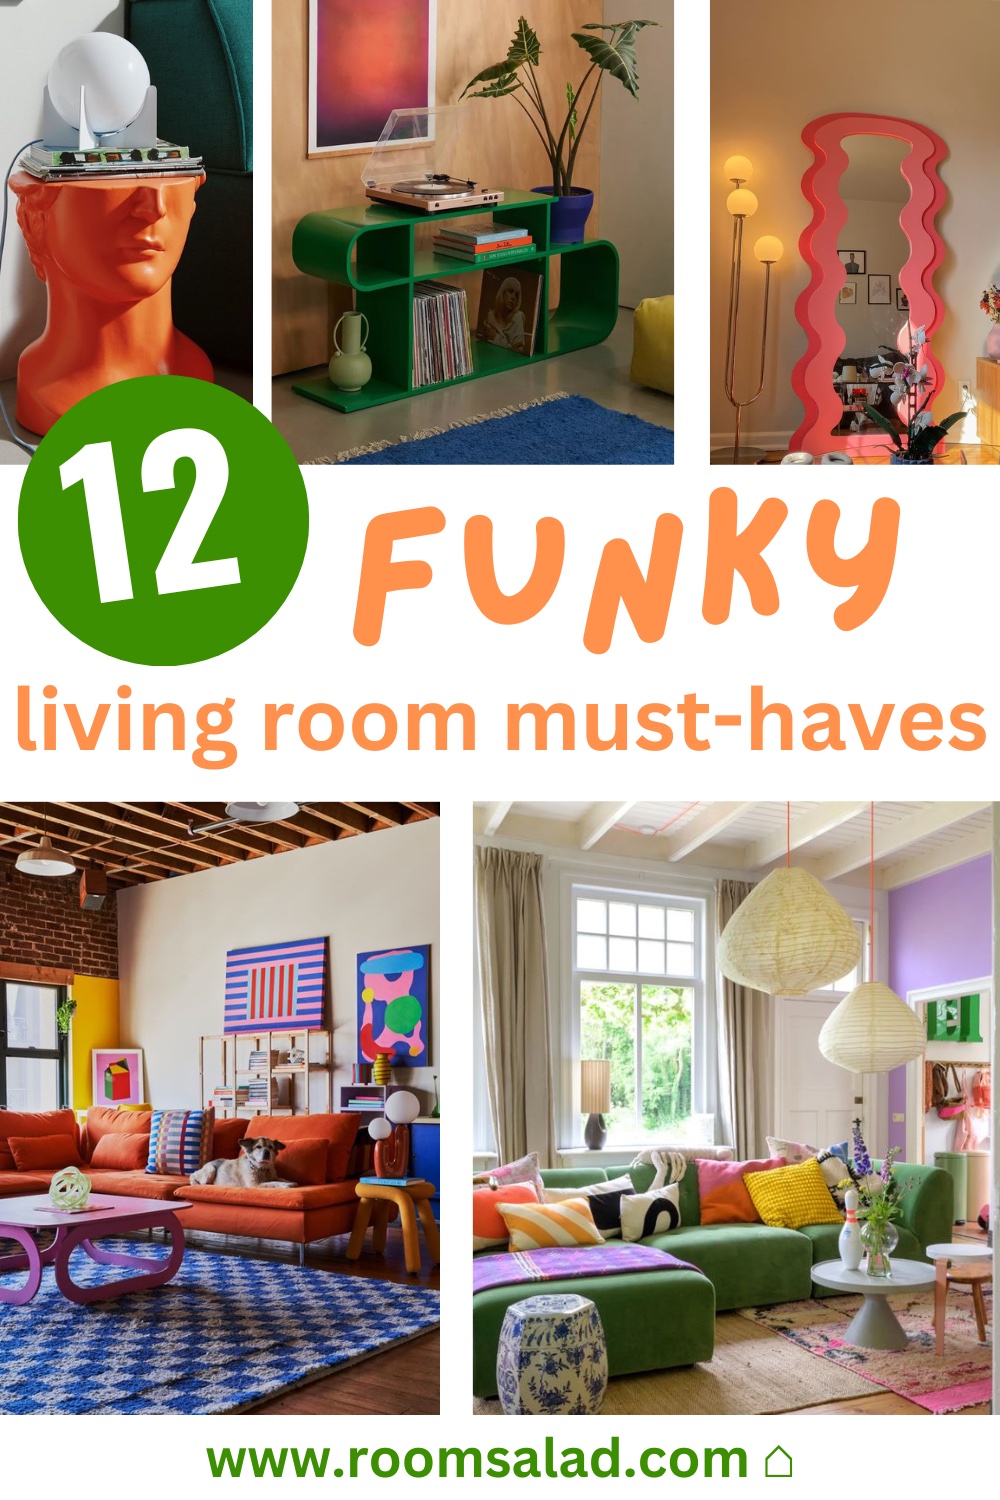 12 Funky Furniture Pieces to Make Your Living Room Unique